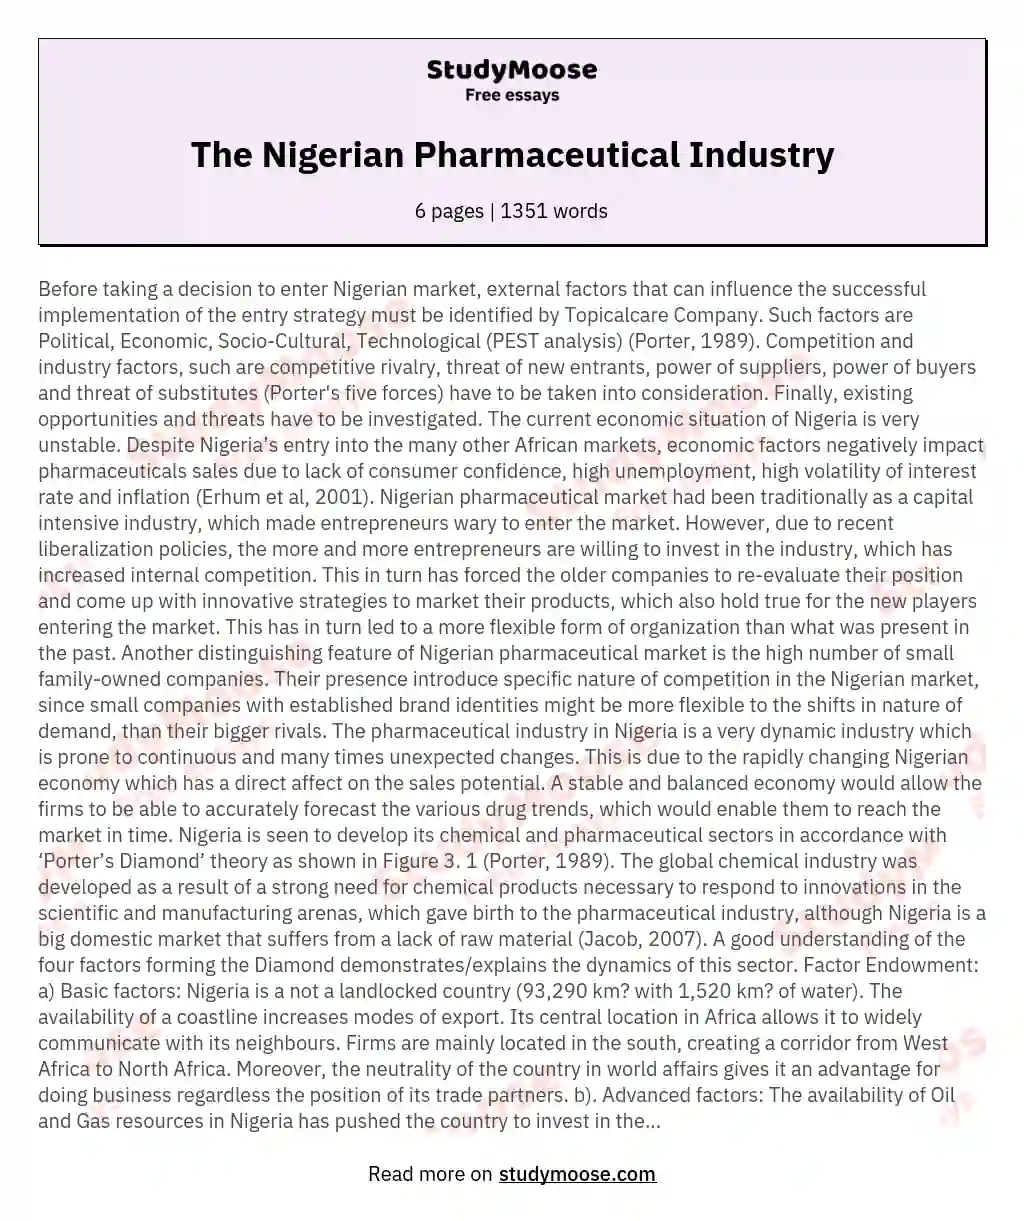 The Nigerian Pharmaceutical Industry essay